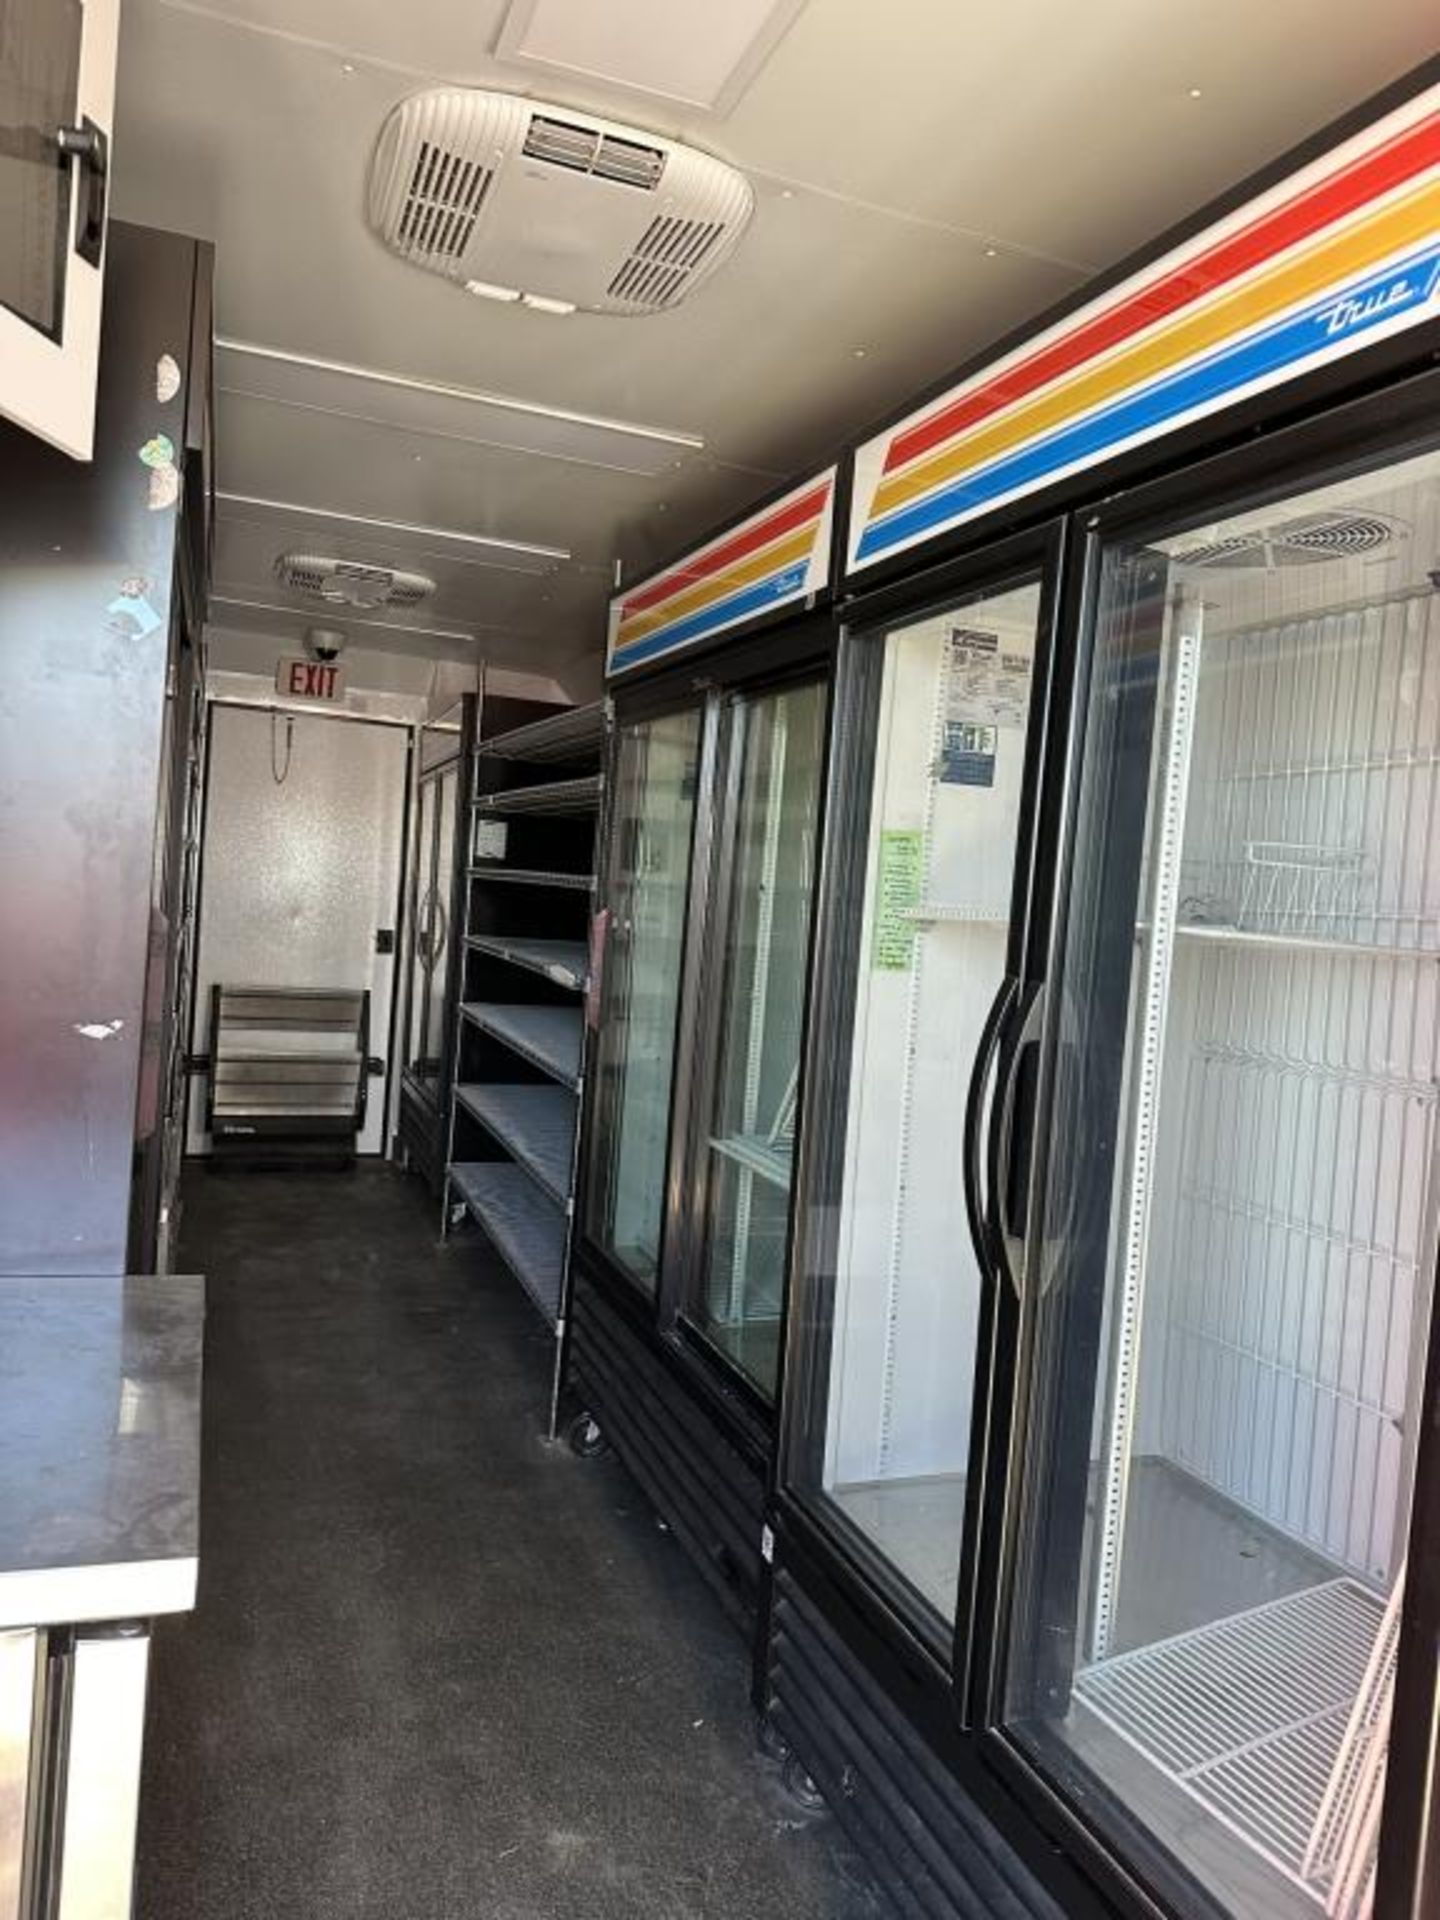 2021 Food Service Support Trailer - Image 7 of 20